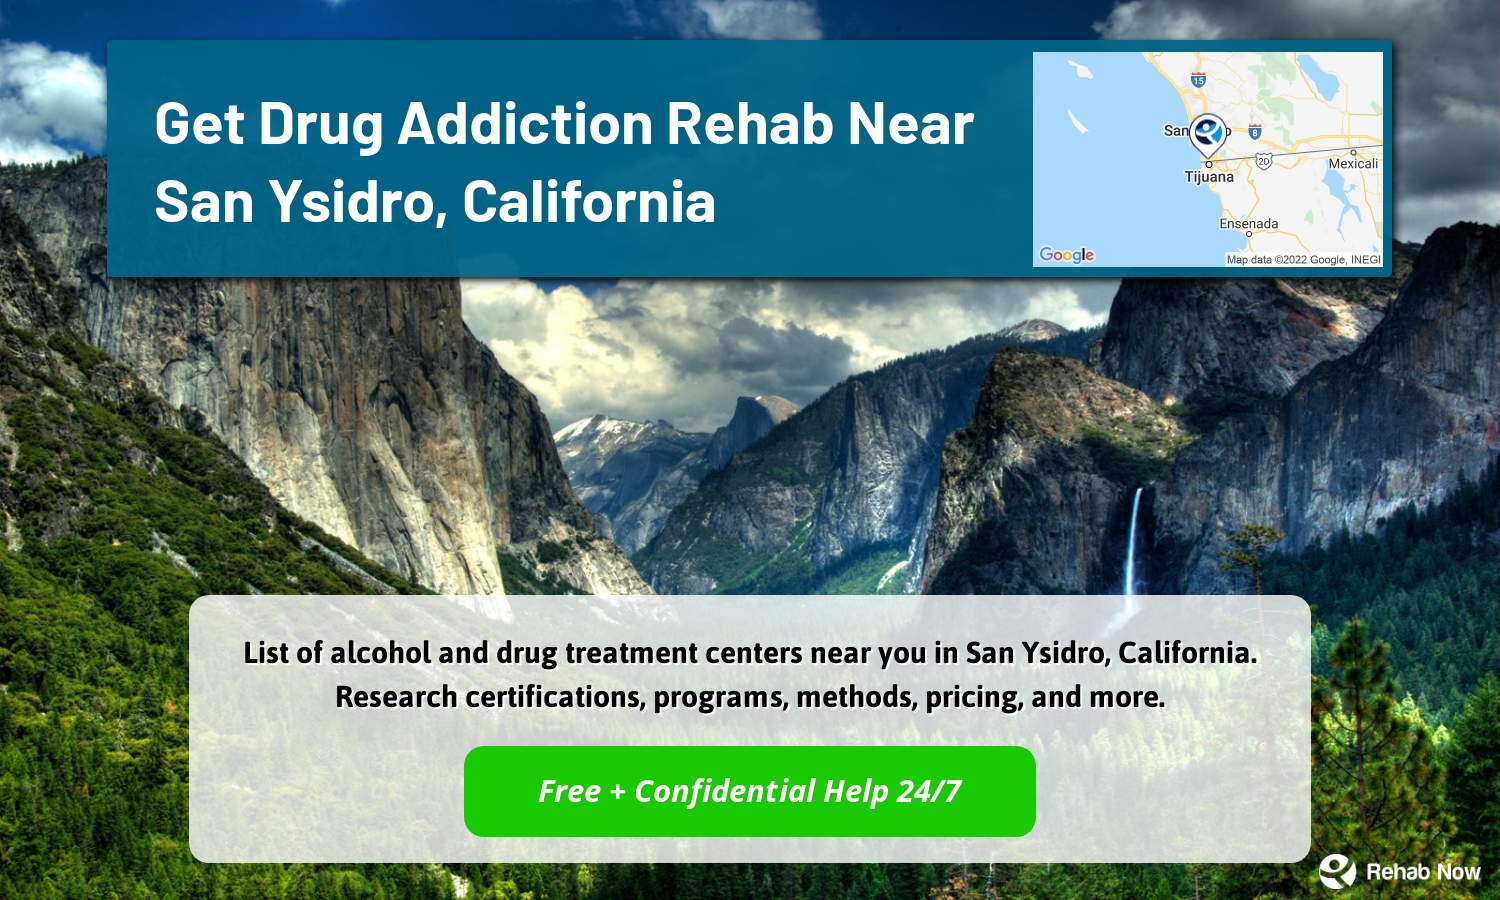 List of alcohol and drug treatment centers near you in San Ysidro, California. Research certifications, programs, methods, pricing, and more.